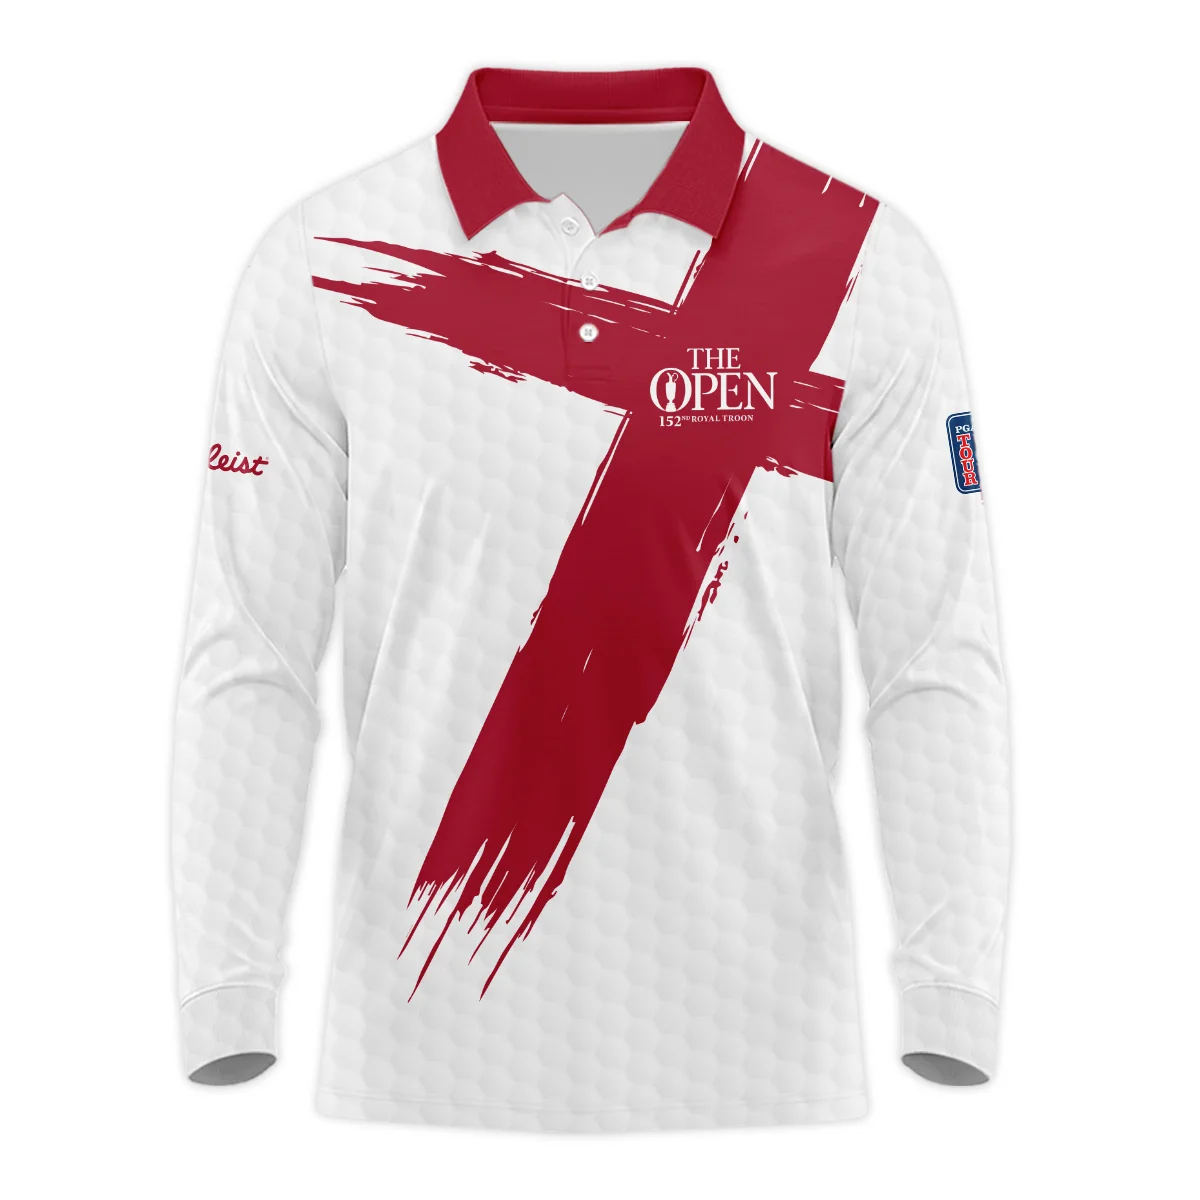 Titleist 152nd The Open Championship Golf Sport Long Polo Shirt Red White Golf Pattern All Over Print Long Polo Shirt For Men